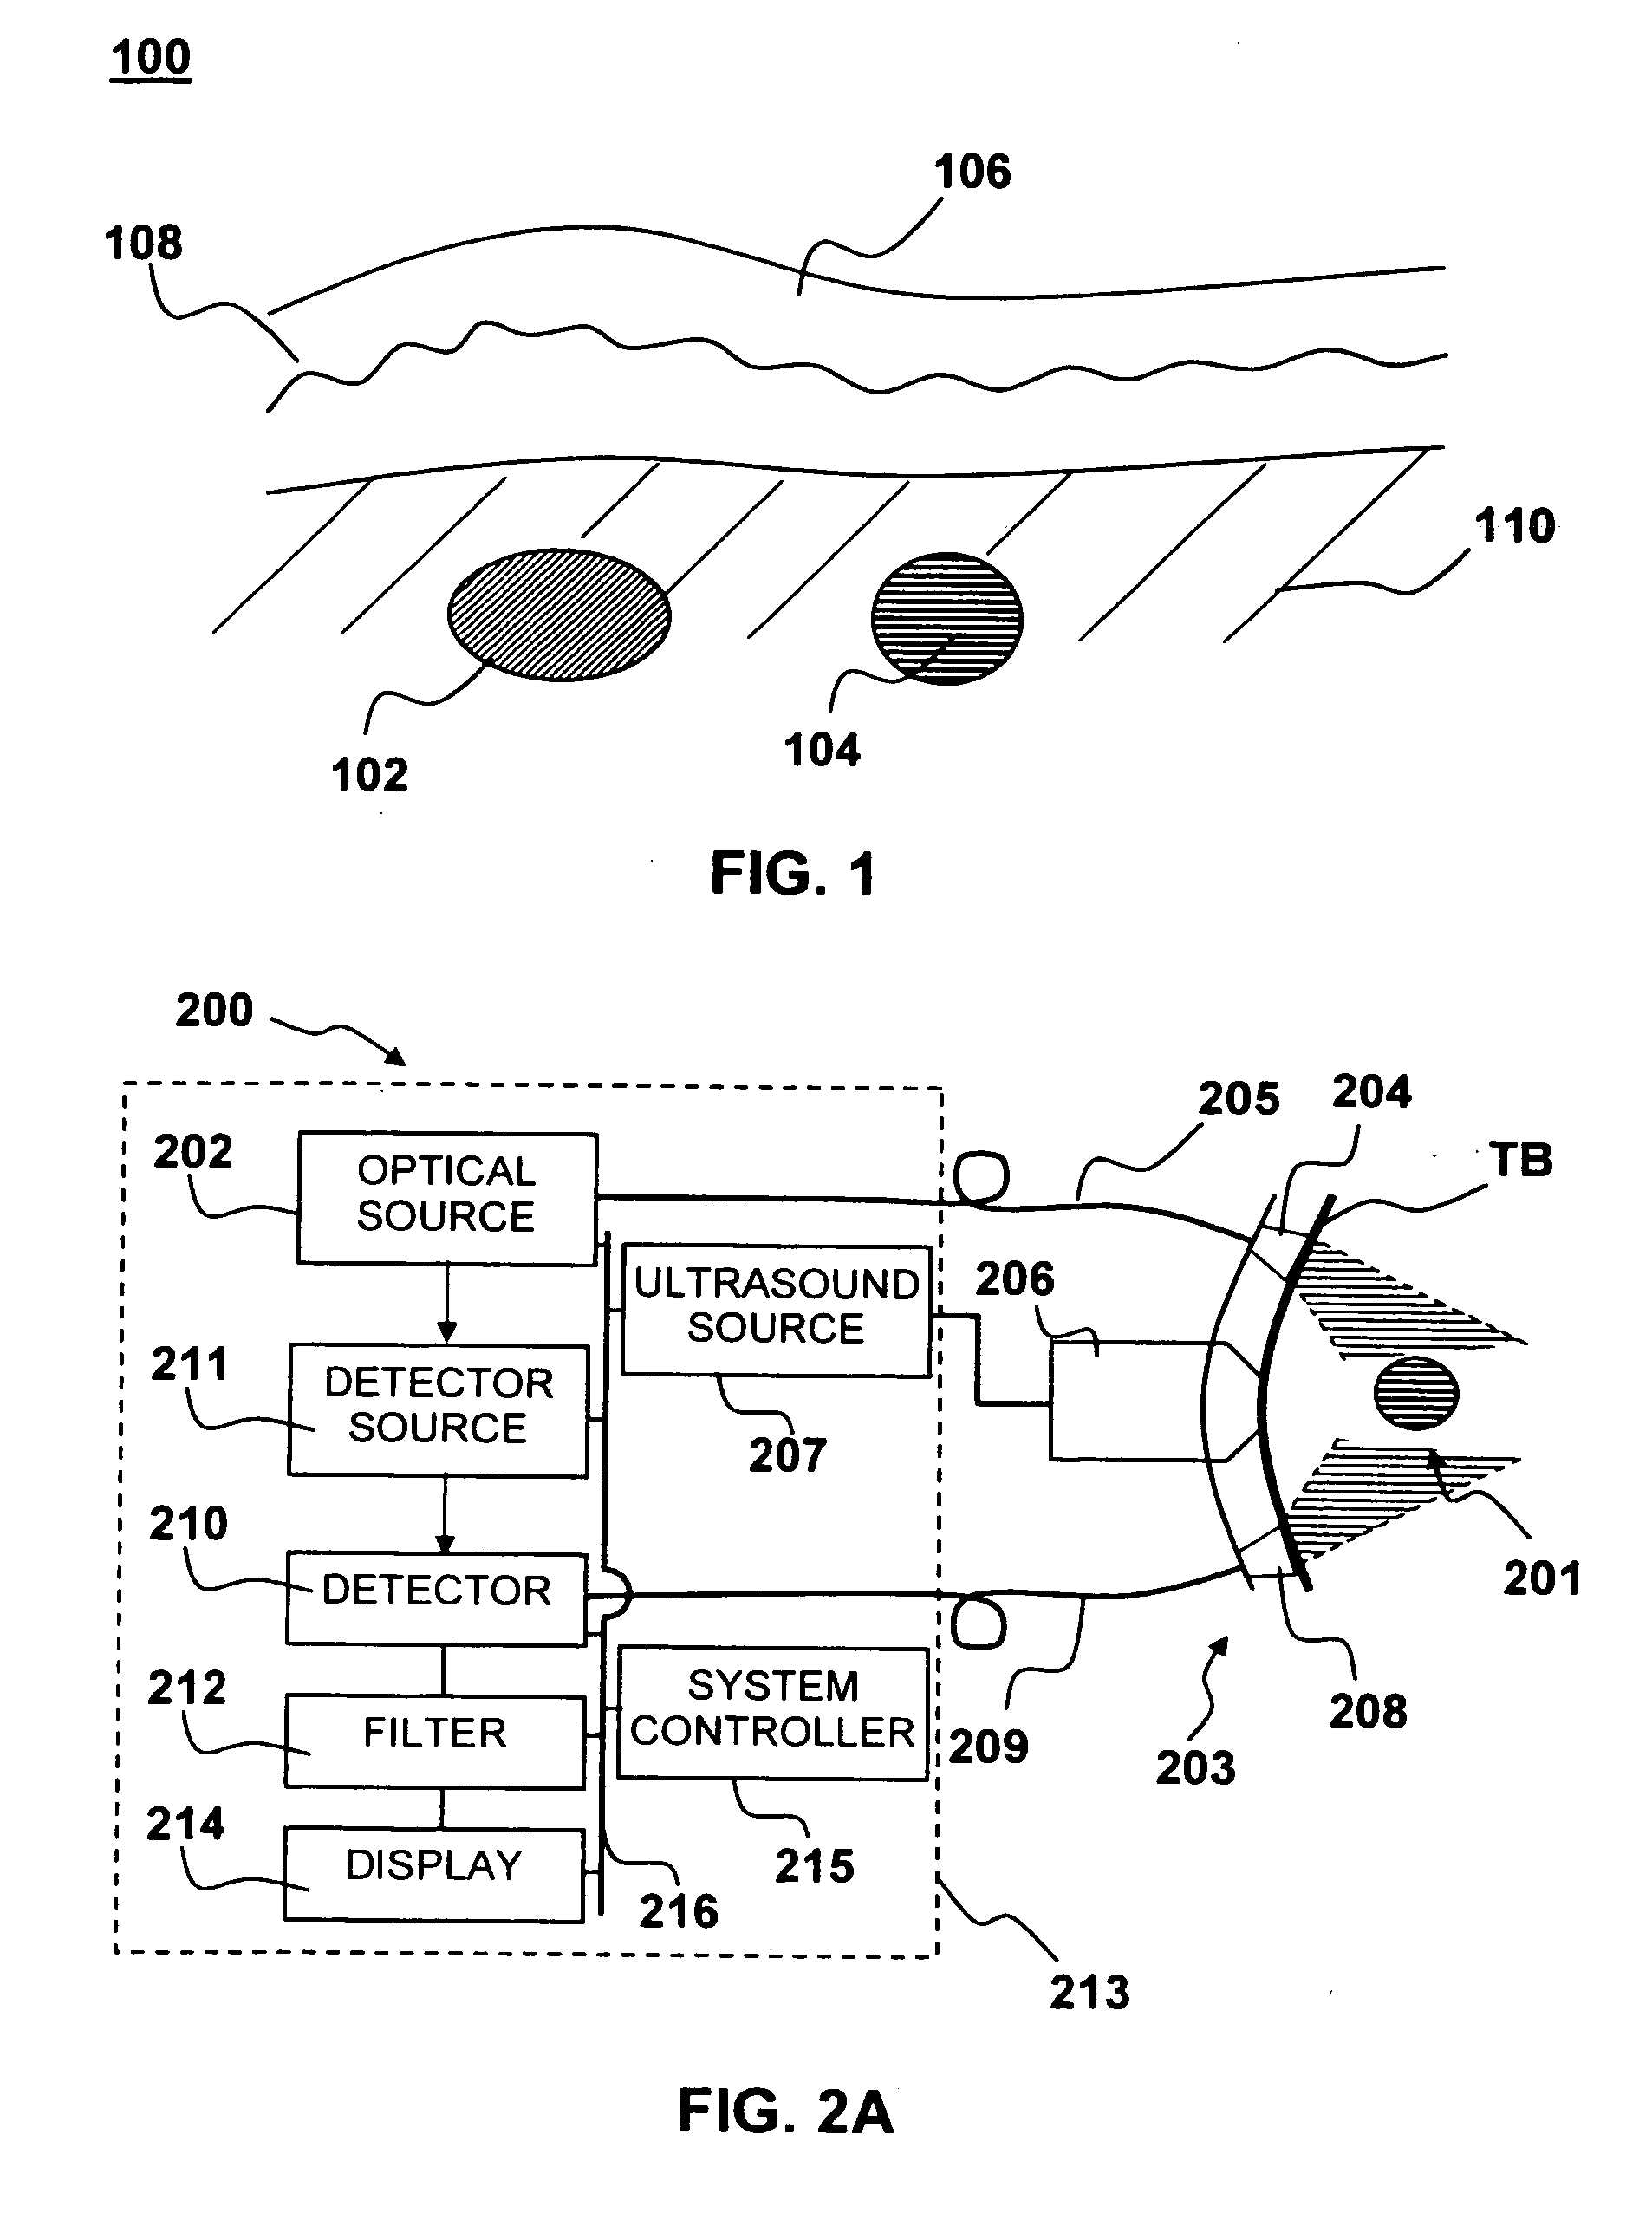 Apparatus and method for non-invasive and minimally-invasive sensing of parameters relating to blood